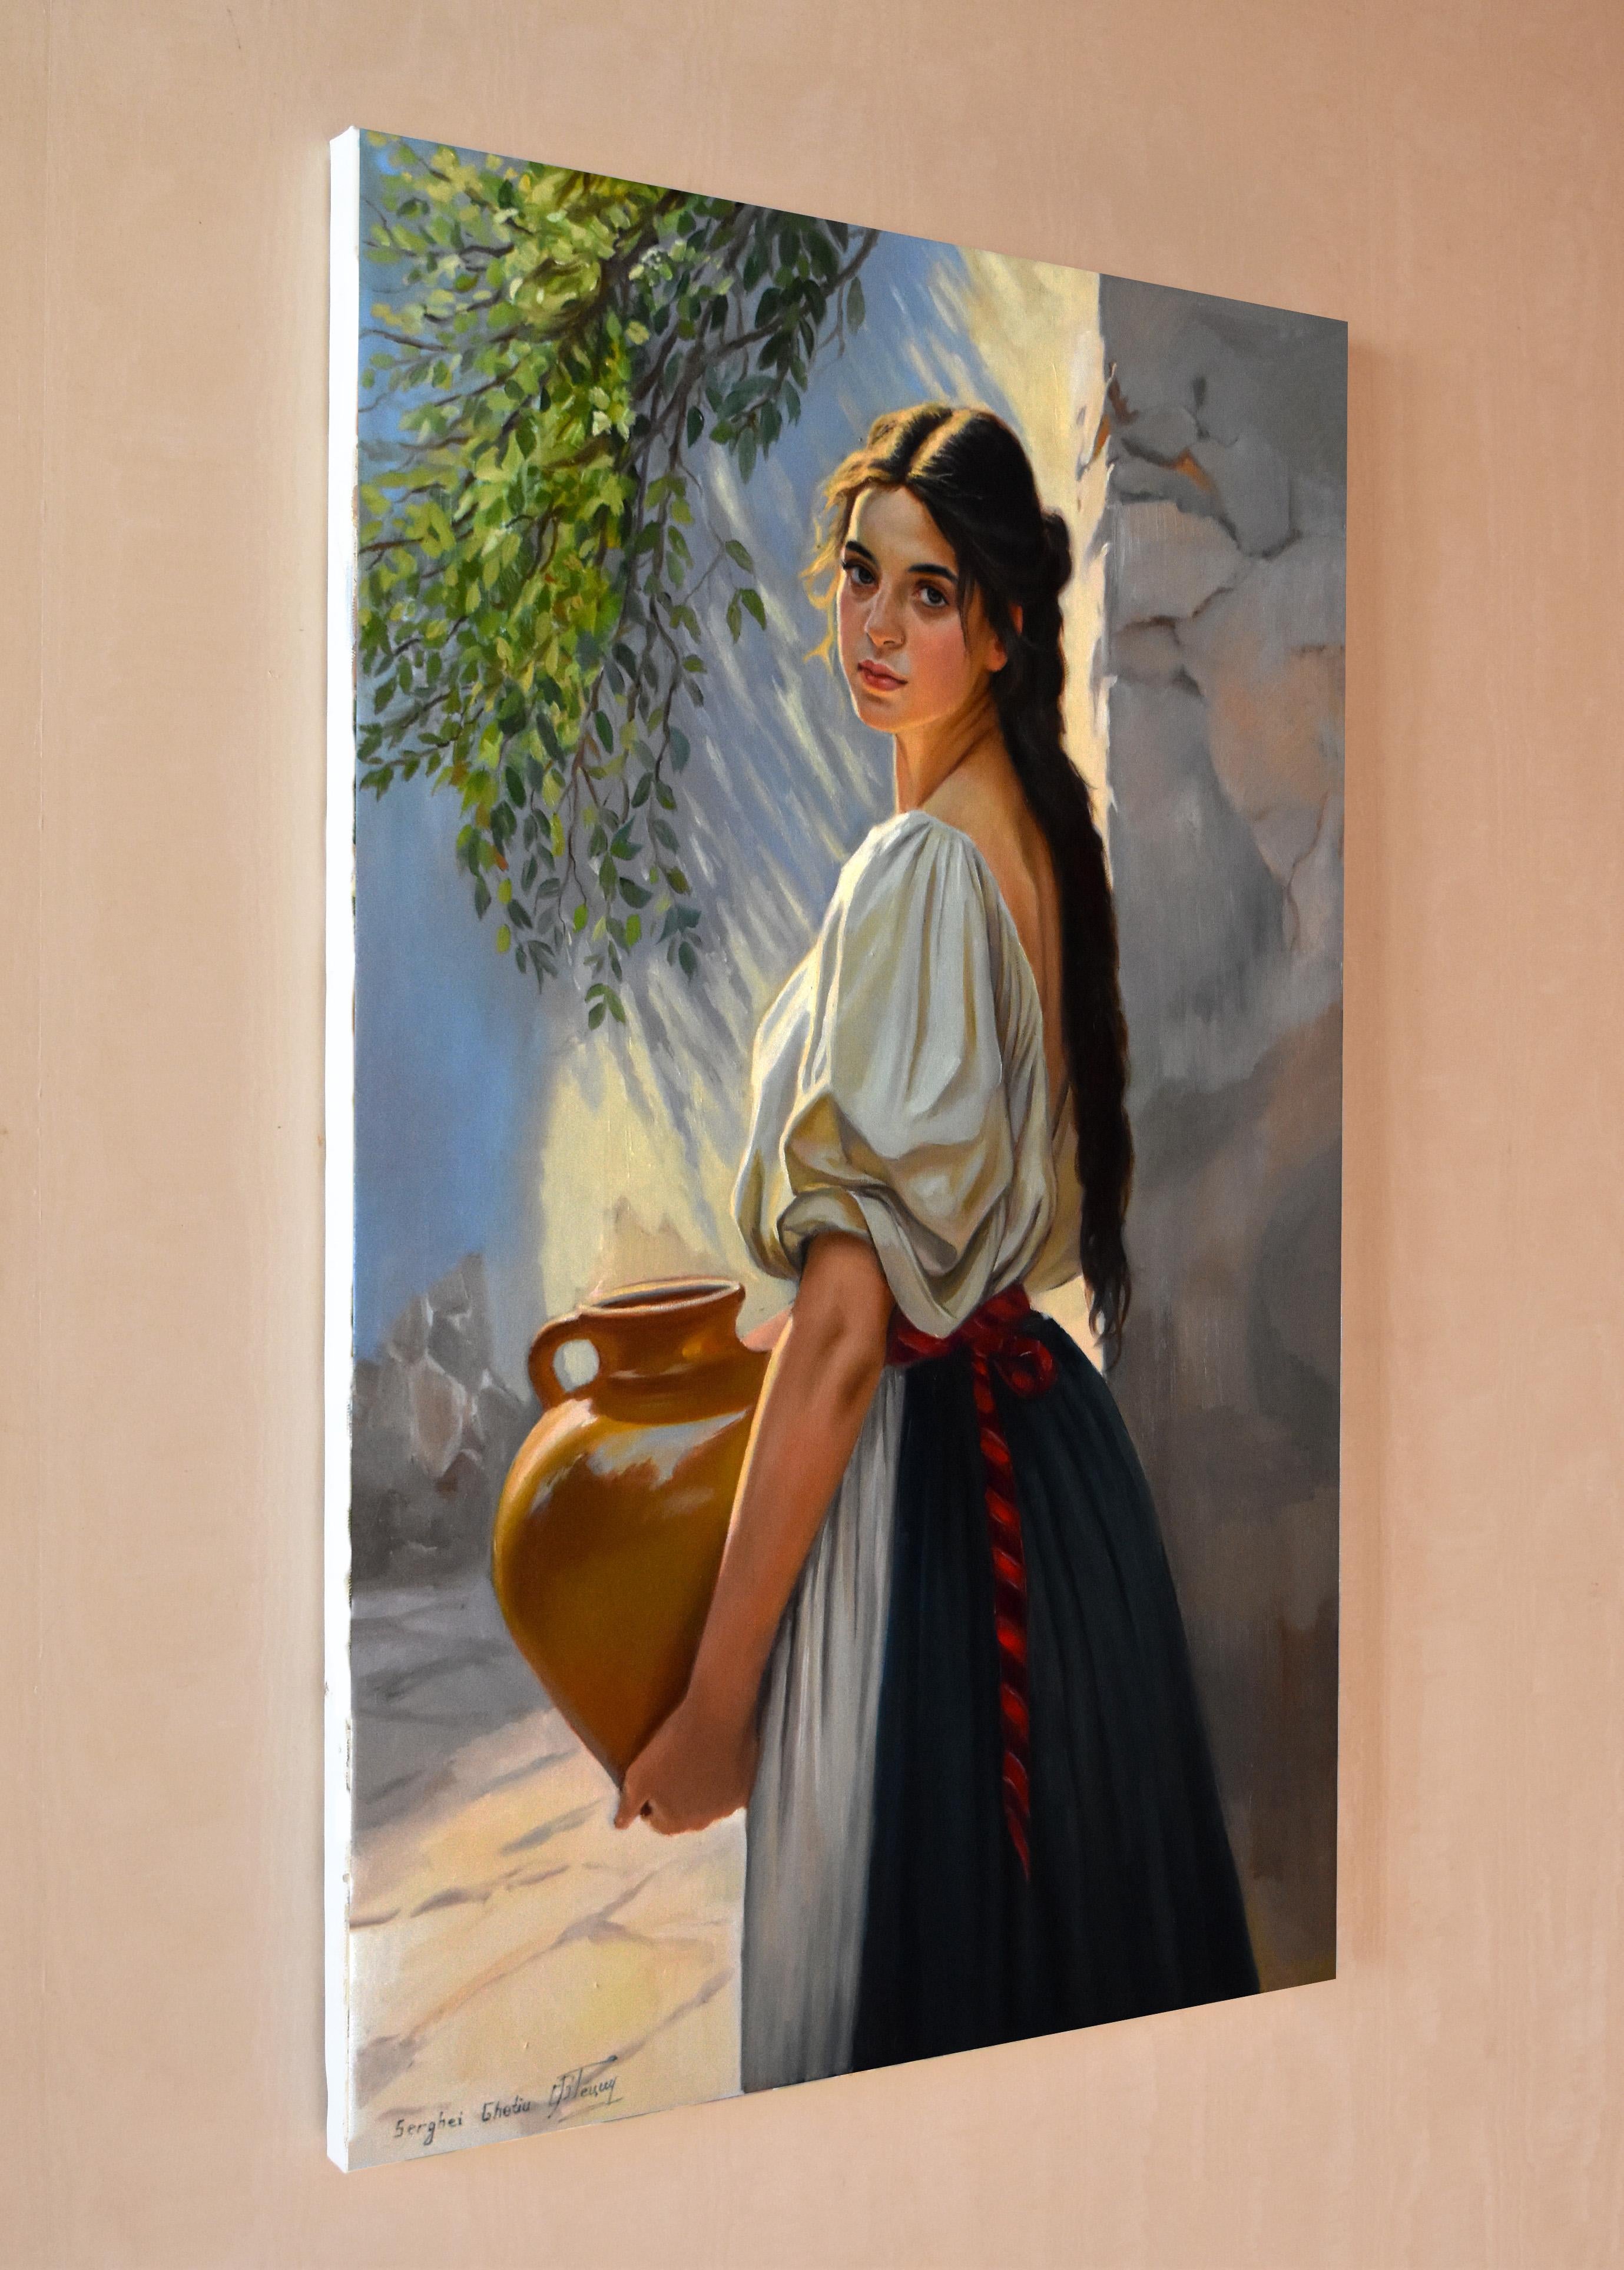 In this oil painting, I've poured my soul into capturing the timeless grace of a moment steeped in sunlight and shadows. Her gaze, a silent conversation with the viewer, is filled with stories untold. This piece, rich with emotion and crafted with